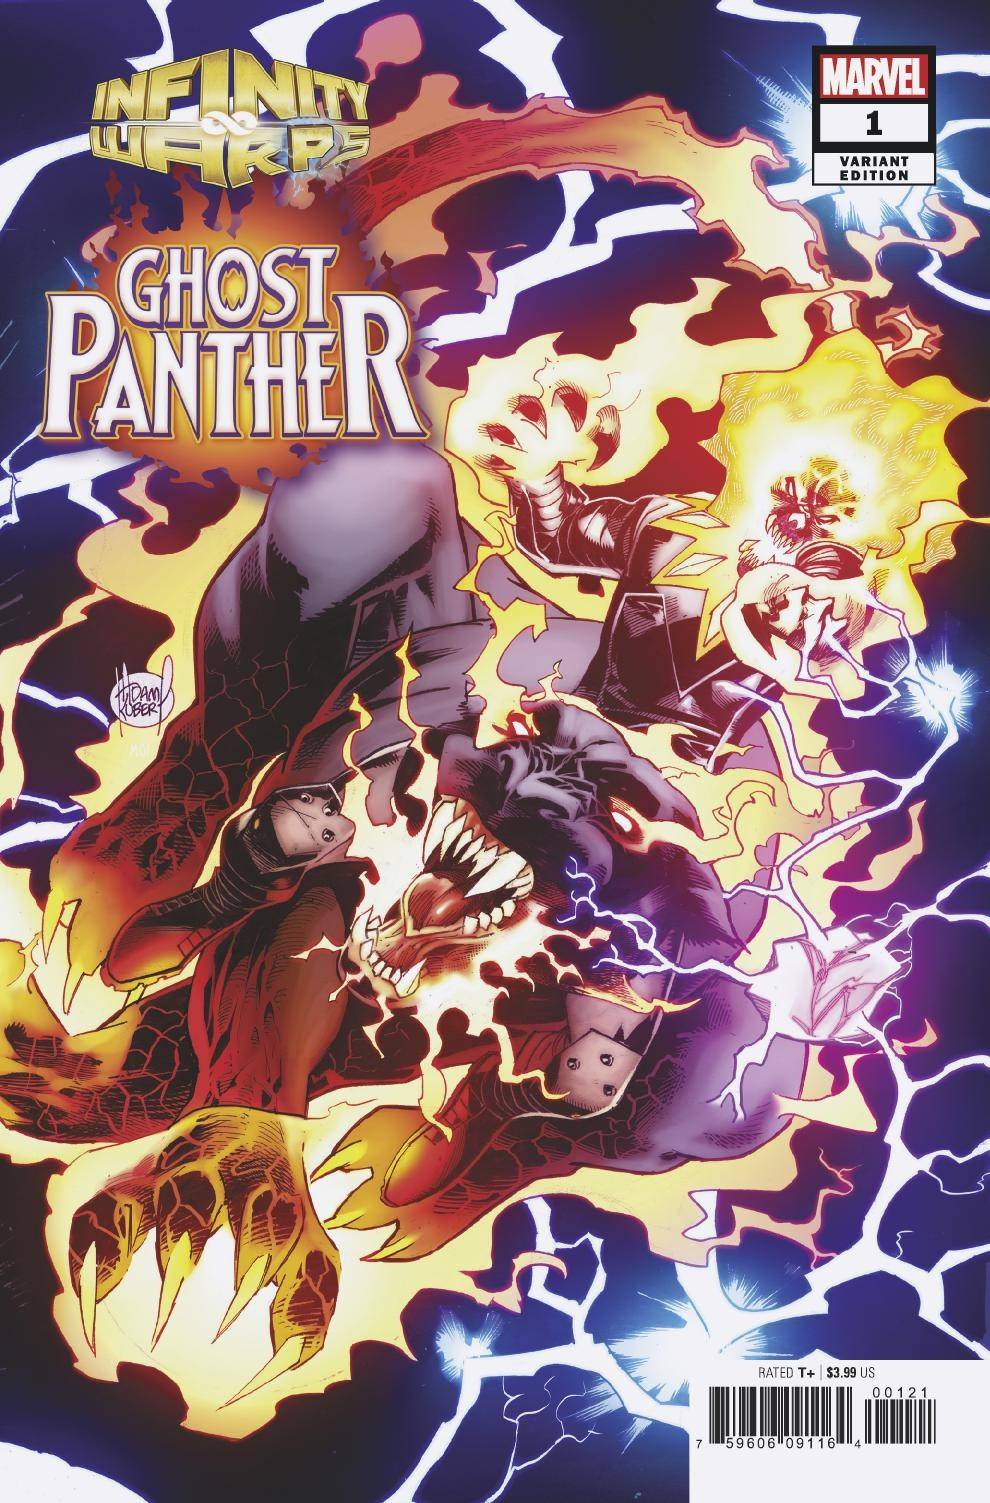 Infinity Wars Ghost Panther #1 Kubert Connecting Variant (Of 2)